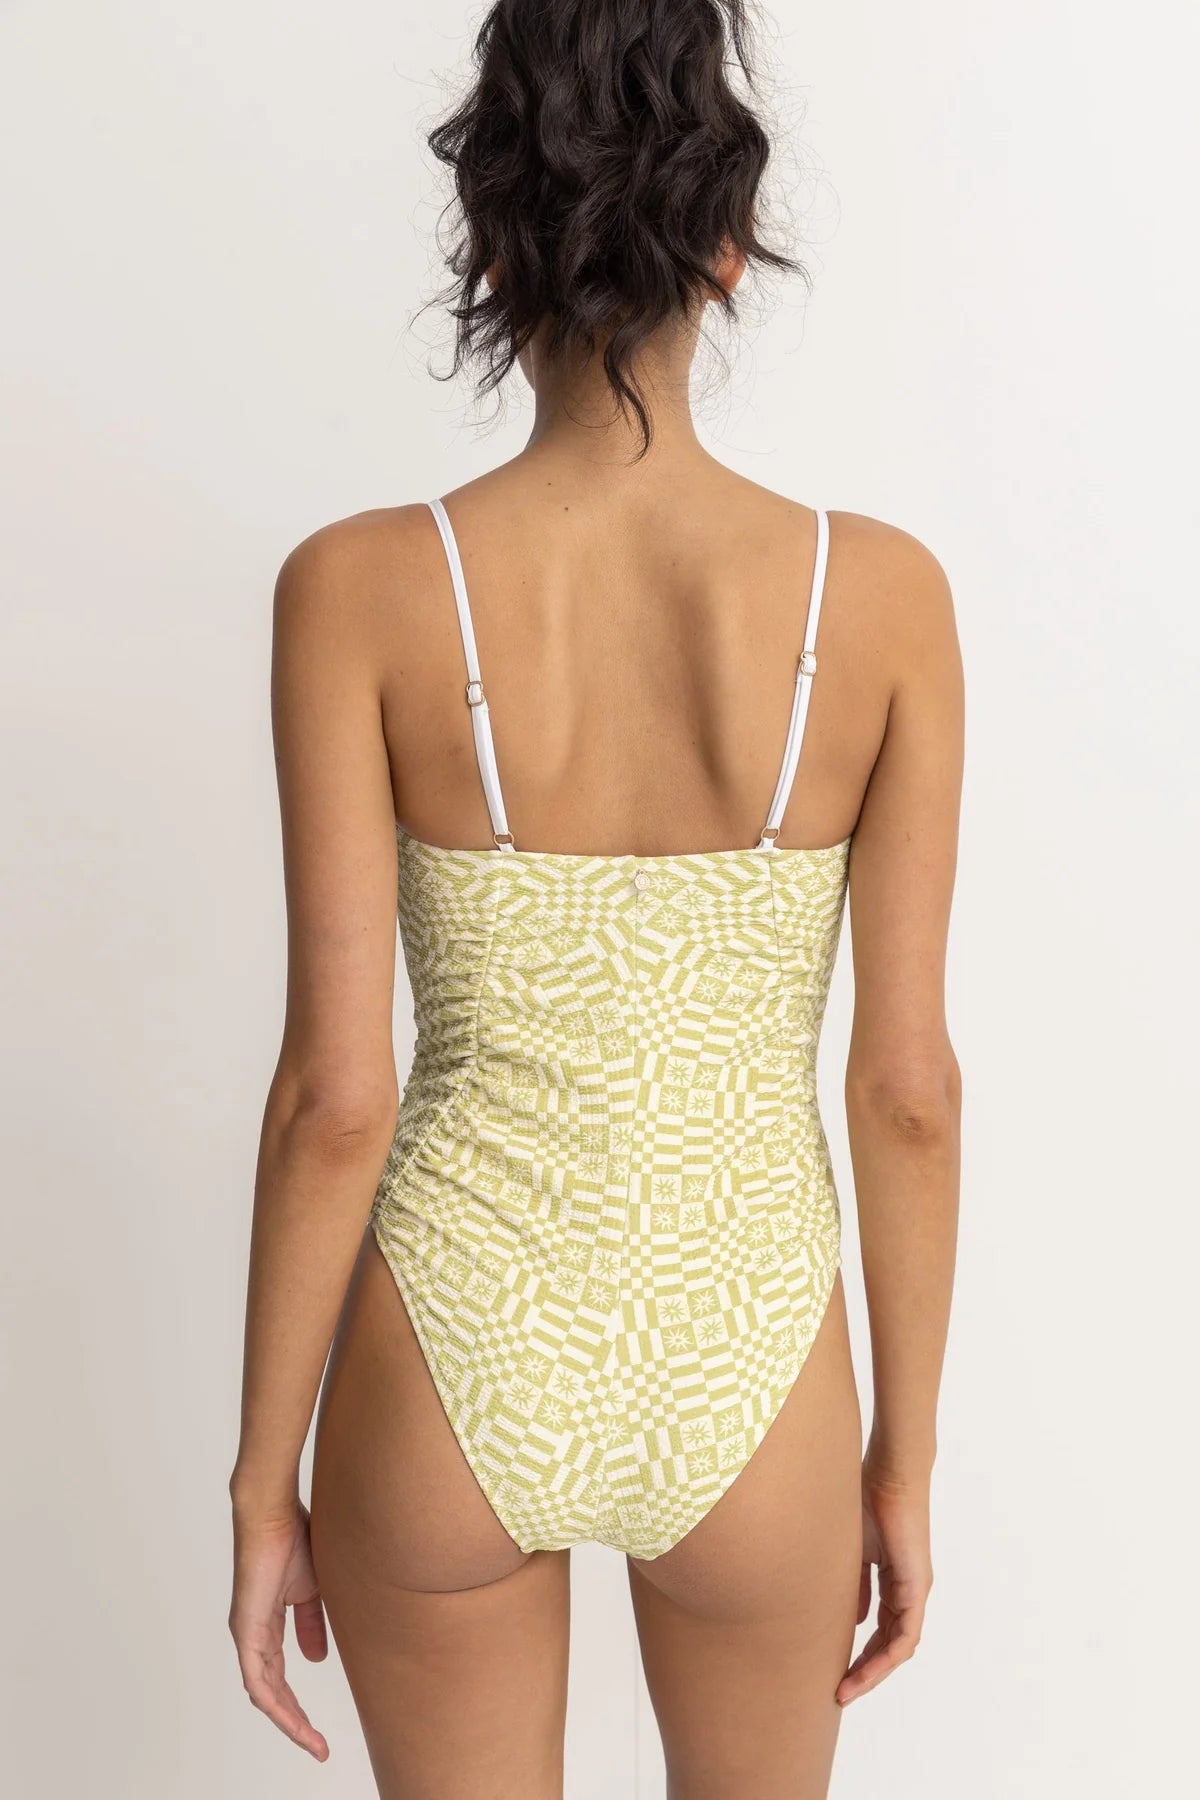 Horizon Scrunched Side One Piece Palm | Collective Request 